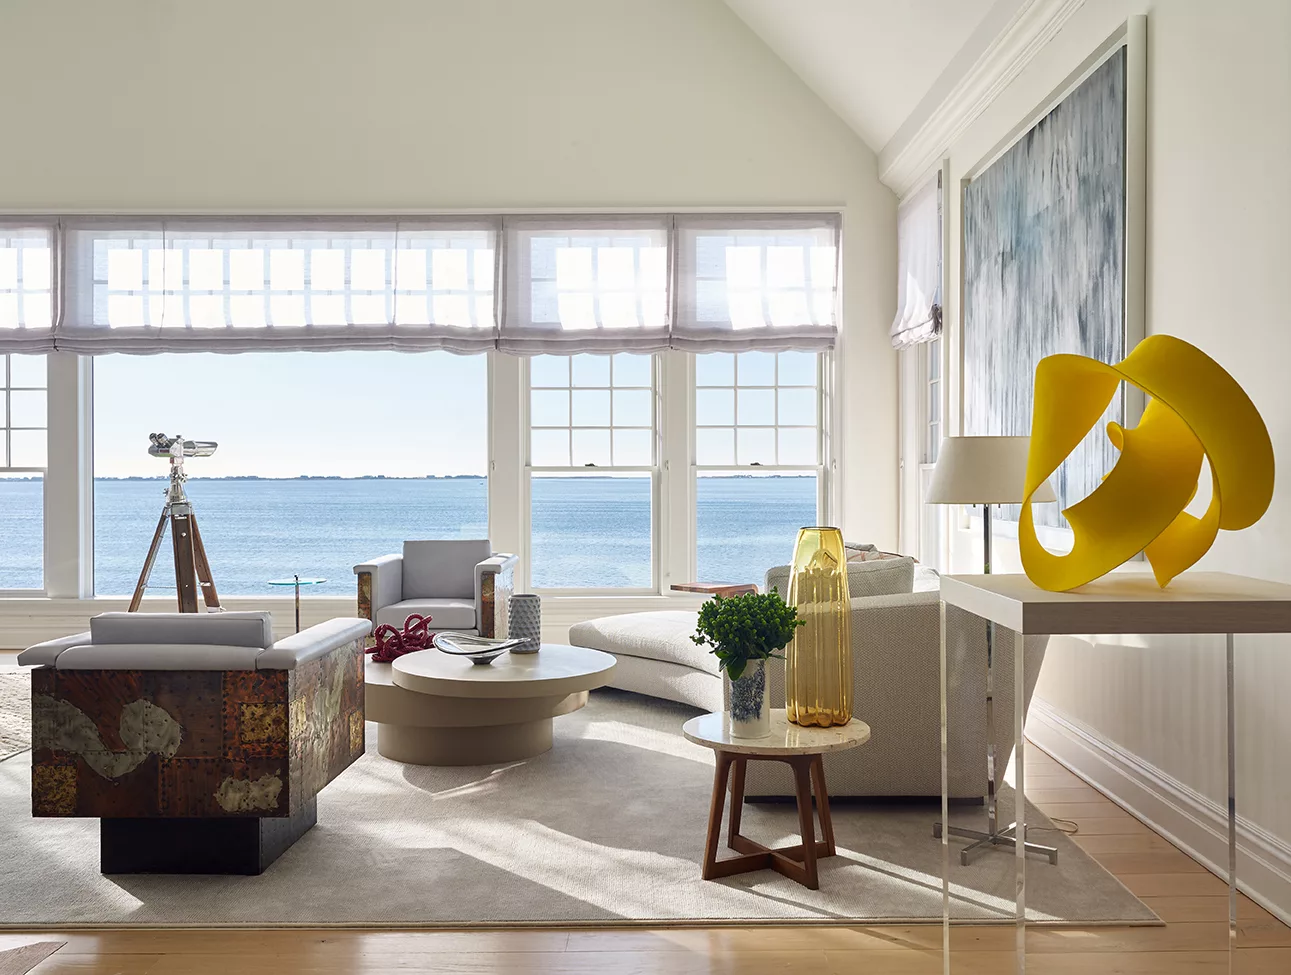 Waterfront Estate | Livingroom with White Cozy Furniture and Big Windows with Views of the Water